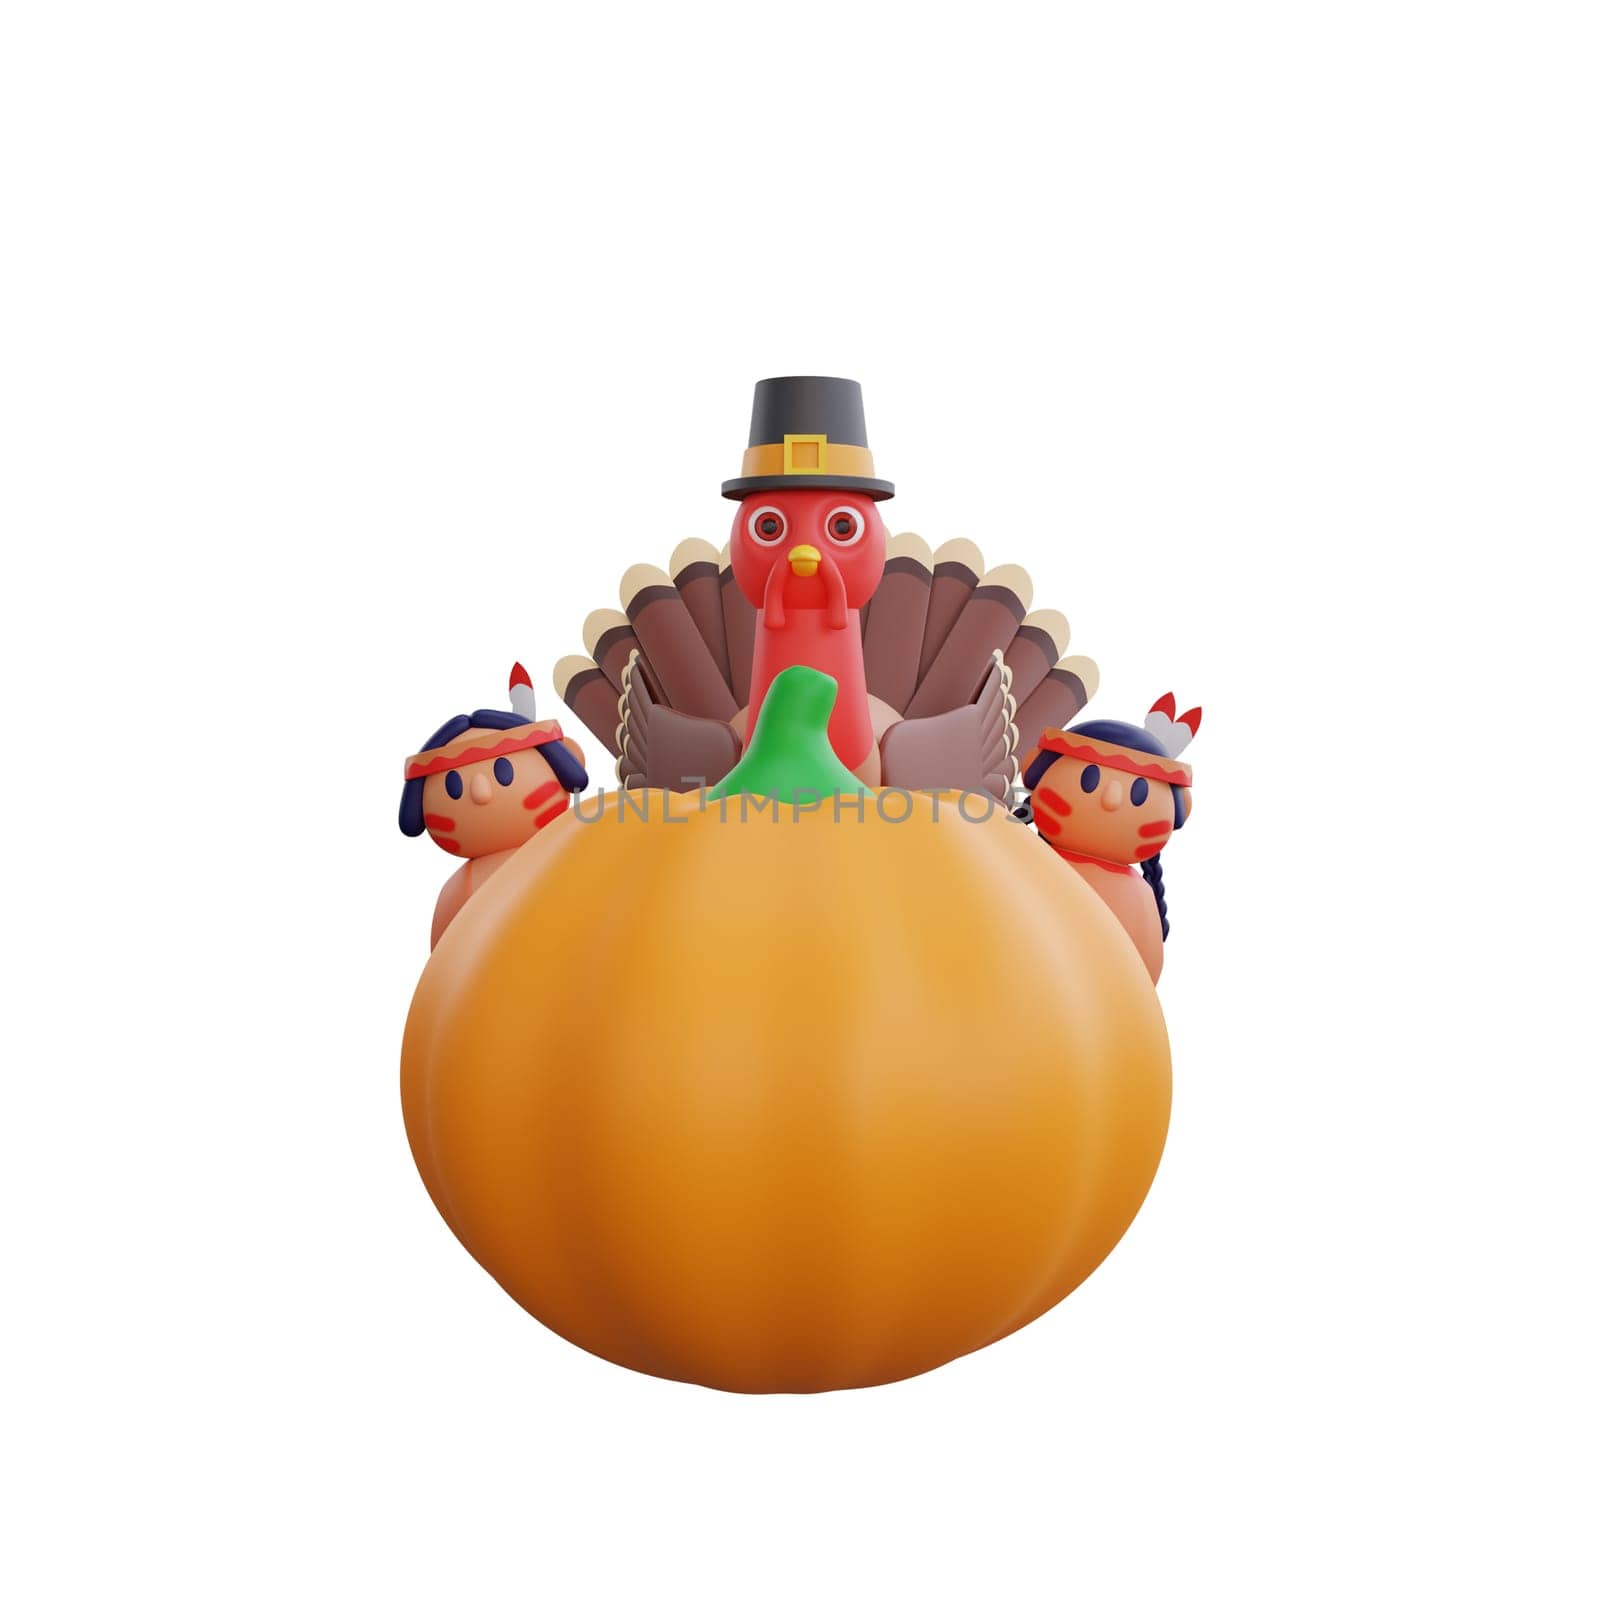 3D illustration of a turkey wearing a hat, standing on a large pumpkin, flanked by two Native American dolls. perfect theme for Thanksgiving design